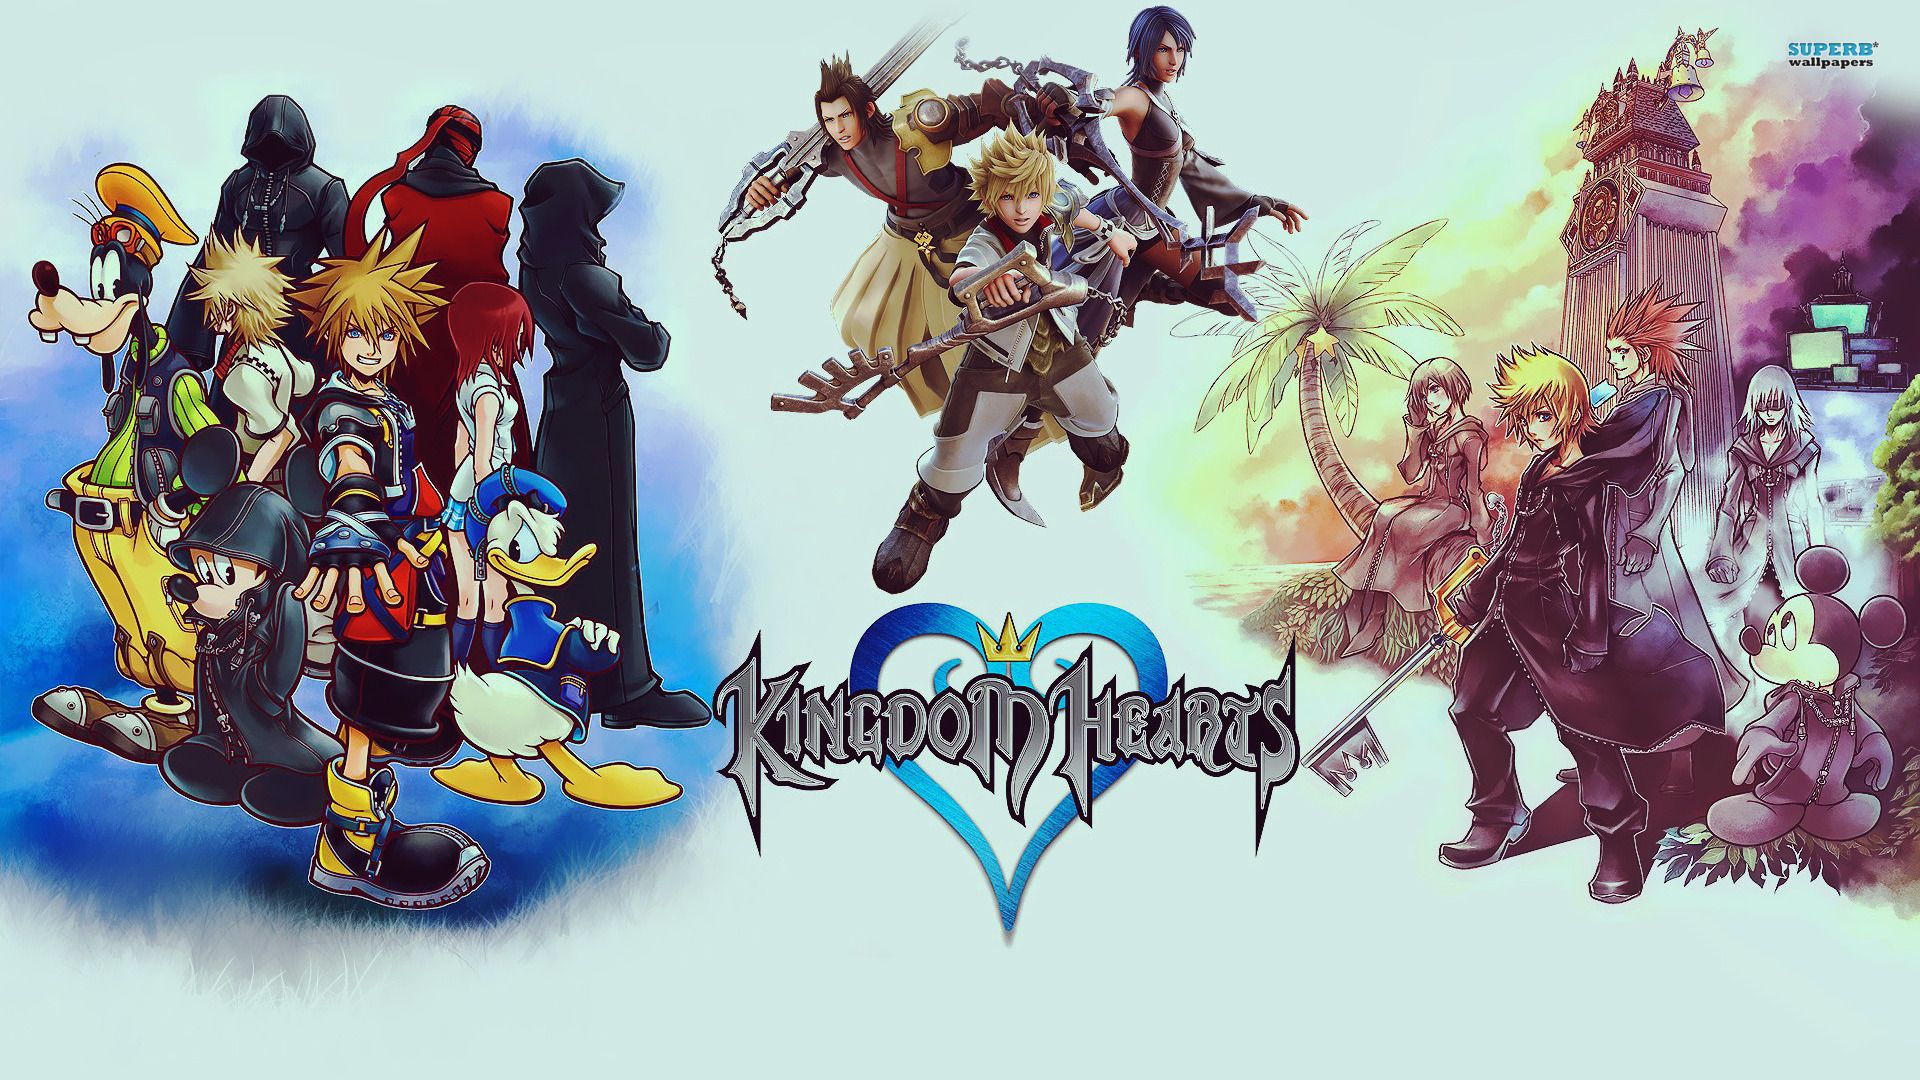 Download Kingdom Hearts HD Wallpapers | Wallpapers, Backgrounds ...